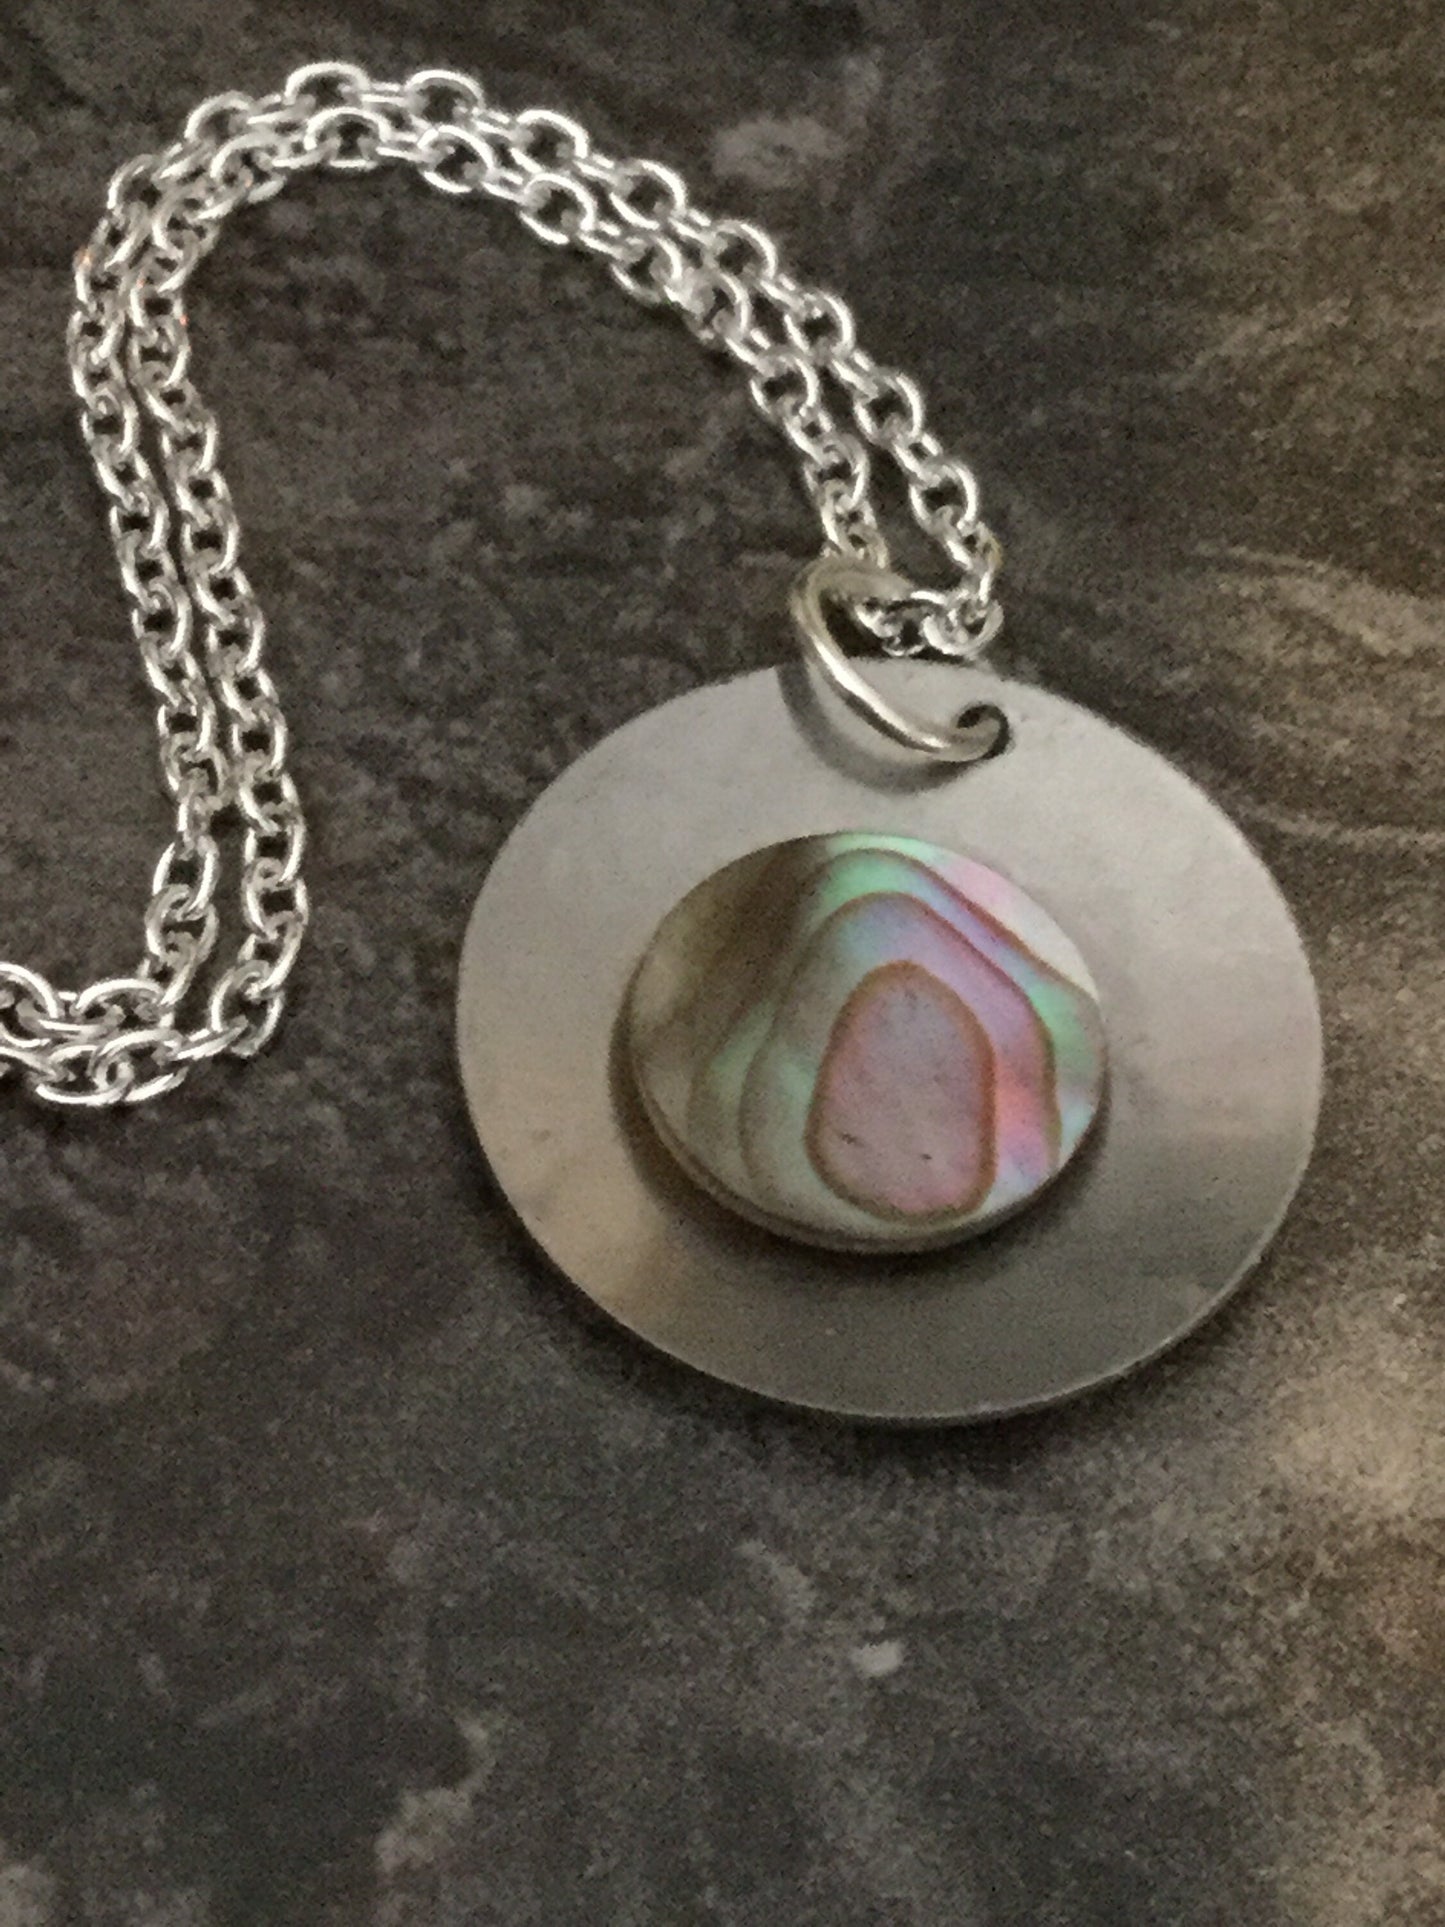 Vintage Modernist silver tone stainless steel necklace chain with central abalone shell